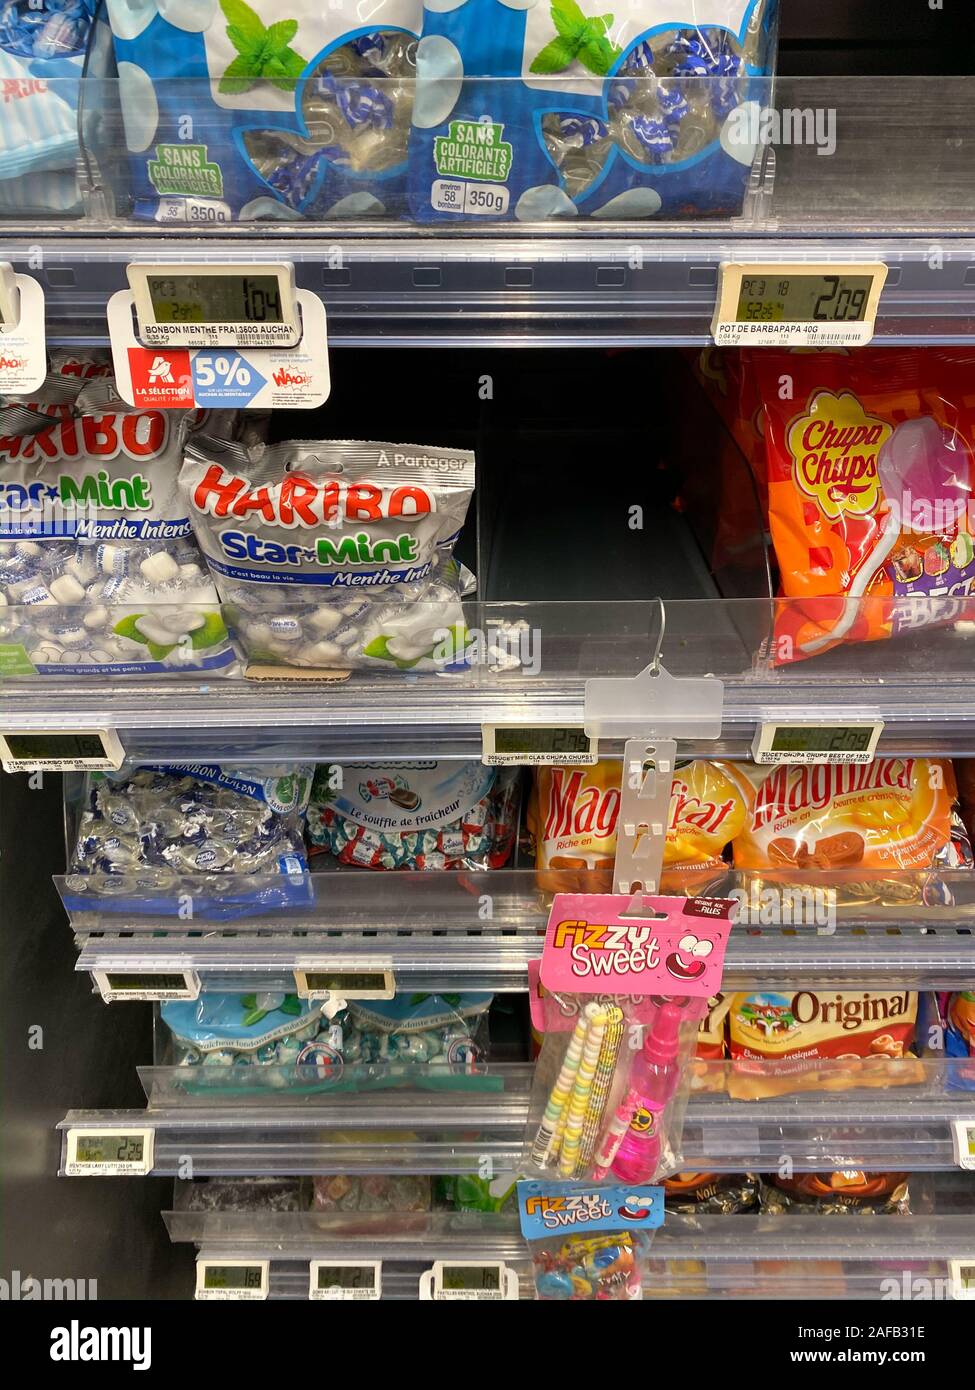 Paris, France- Oct 18, 2019: Multiple sweets from Haribo and Chupa